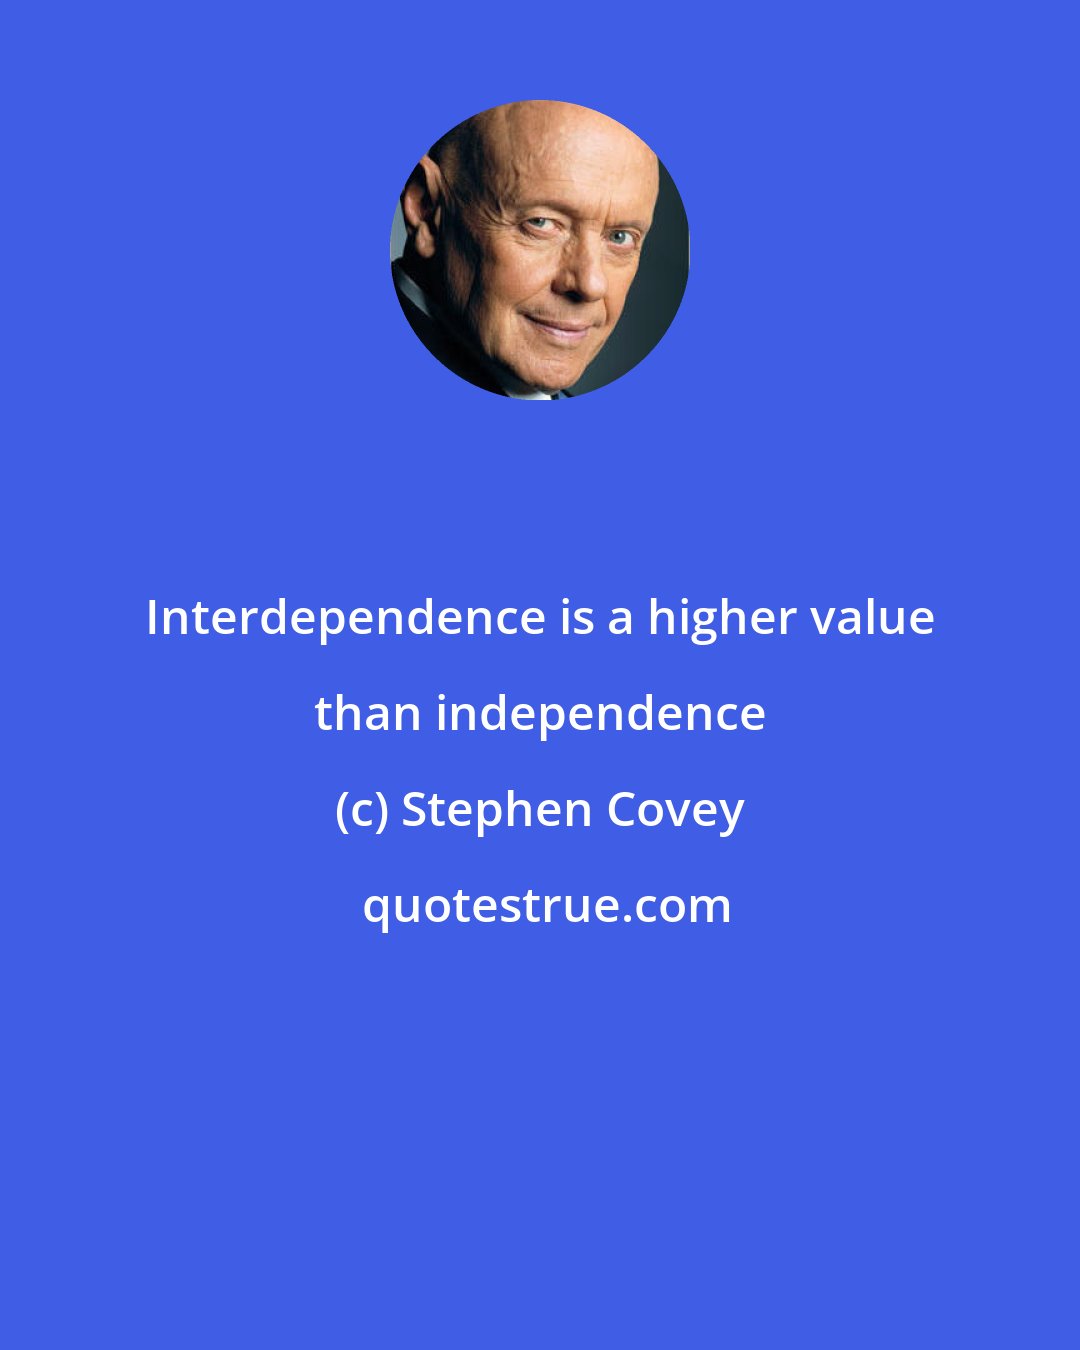 Stephen Covey: Interdependence is a higher value than independence